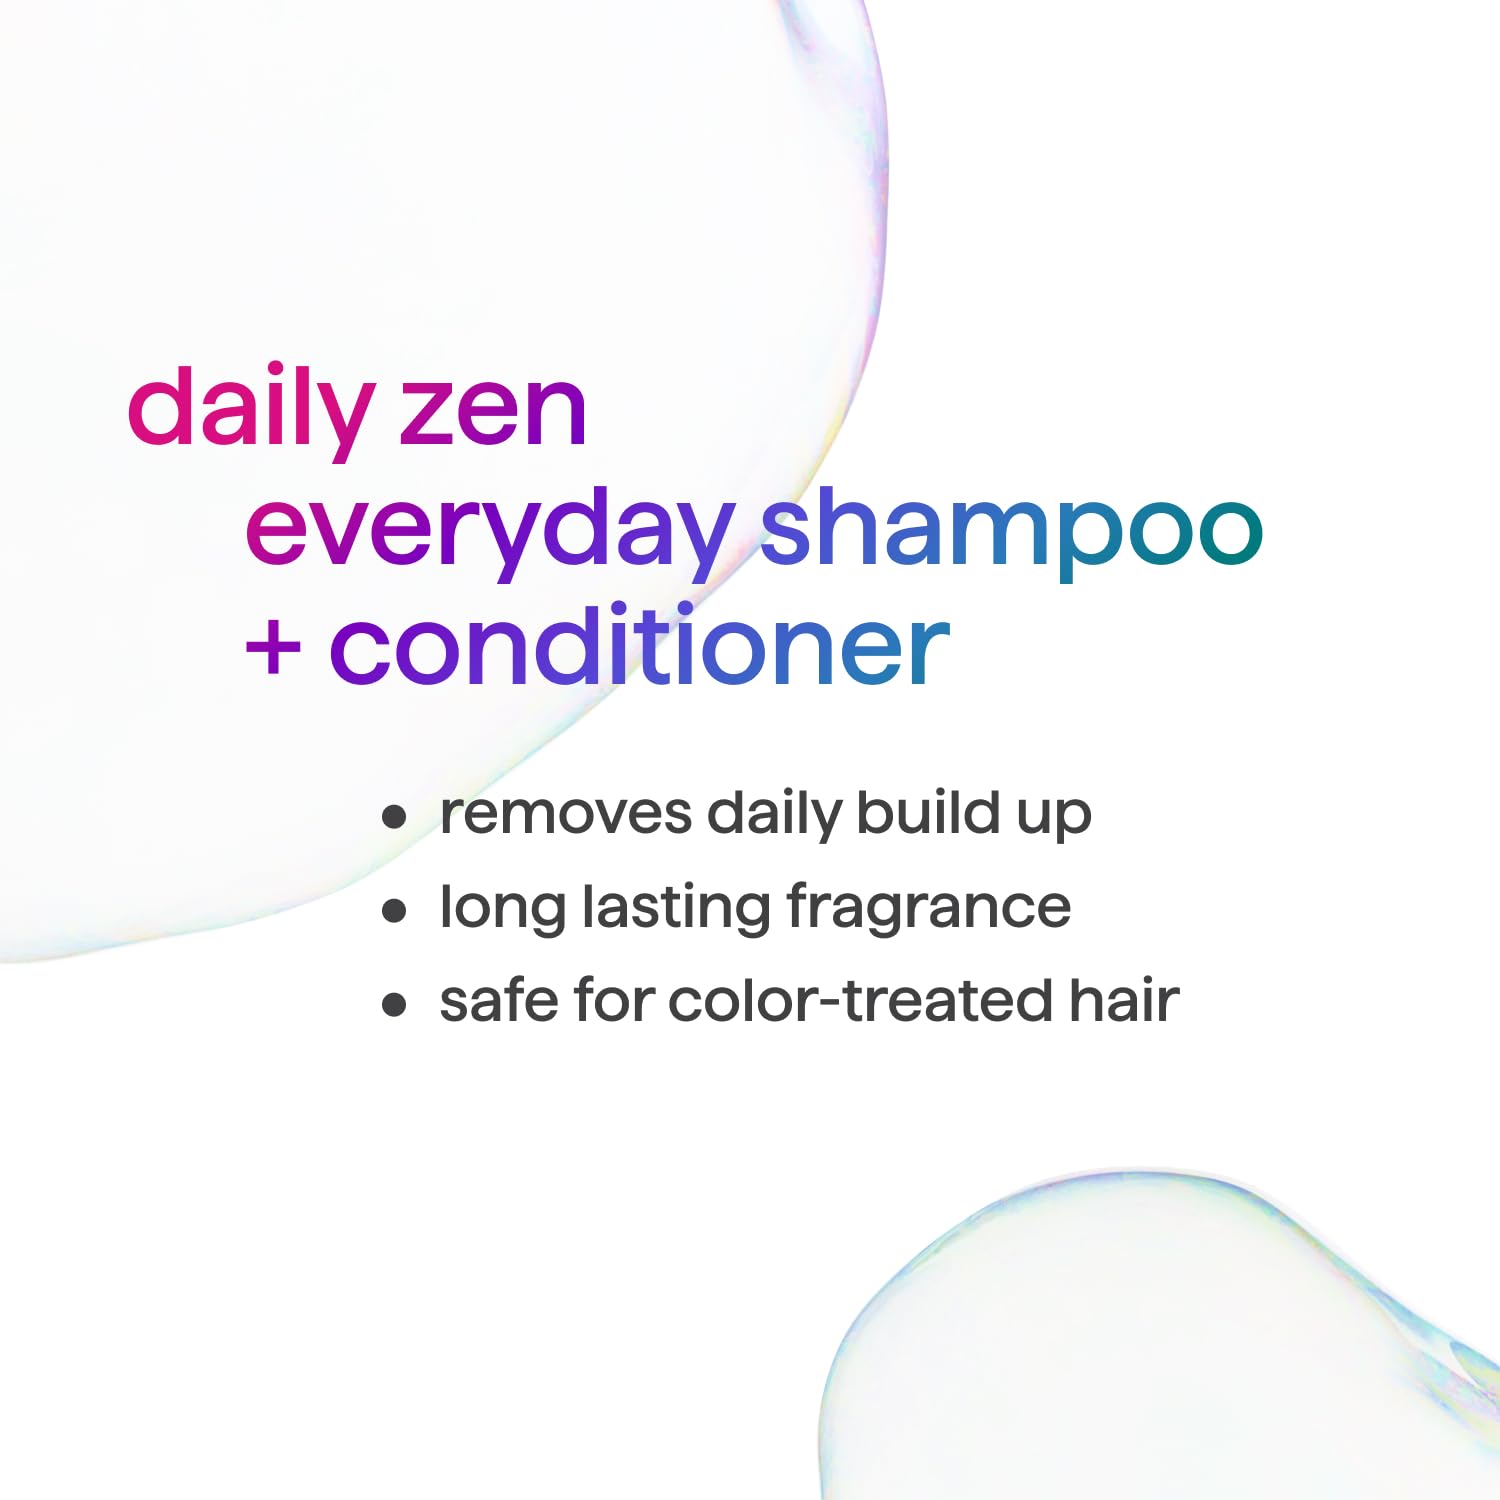 Method Everyday Conditioner, Daily Zen with Cucumber, Green Tea, and Seaweed Scent Notes, Paraben and Sulfate Free, 13.5 oz (Pack of 1) : Beauty & Personal Care